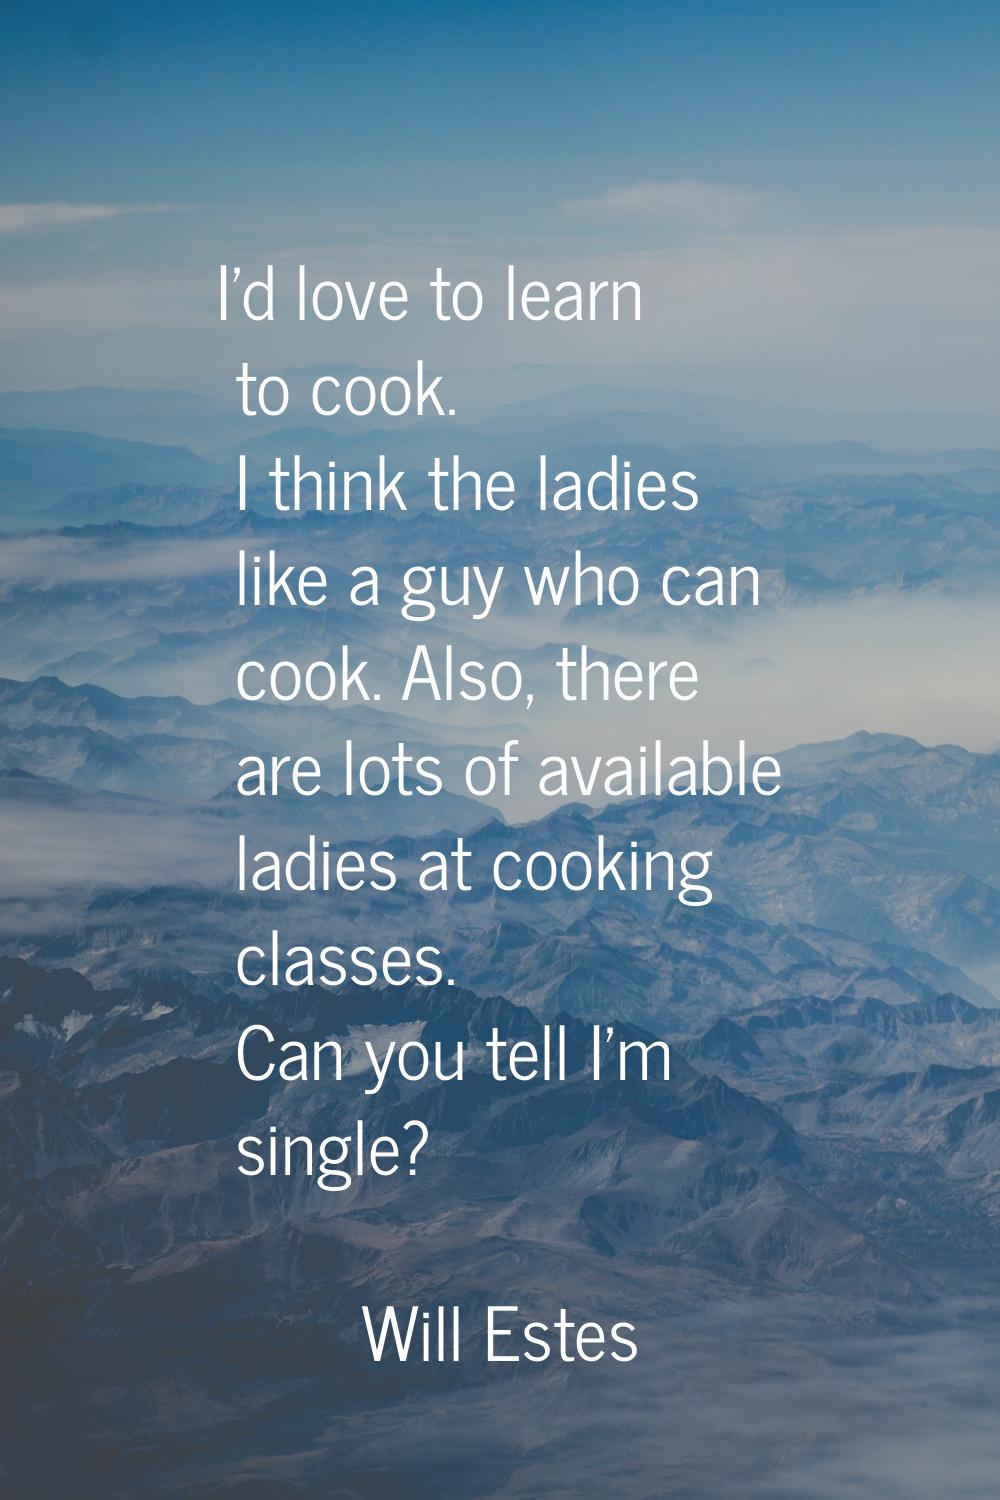 I'd love to learn to cook. I think the ladies like a guy who can cook. Also, there are lots of avai